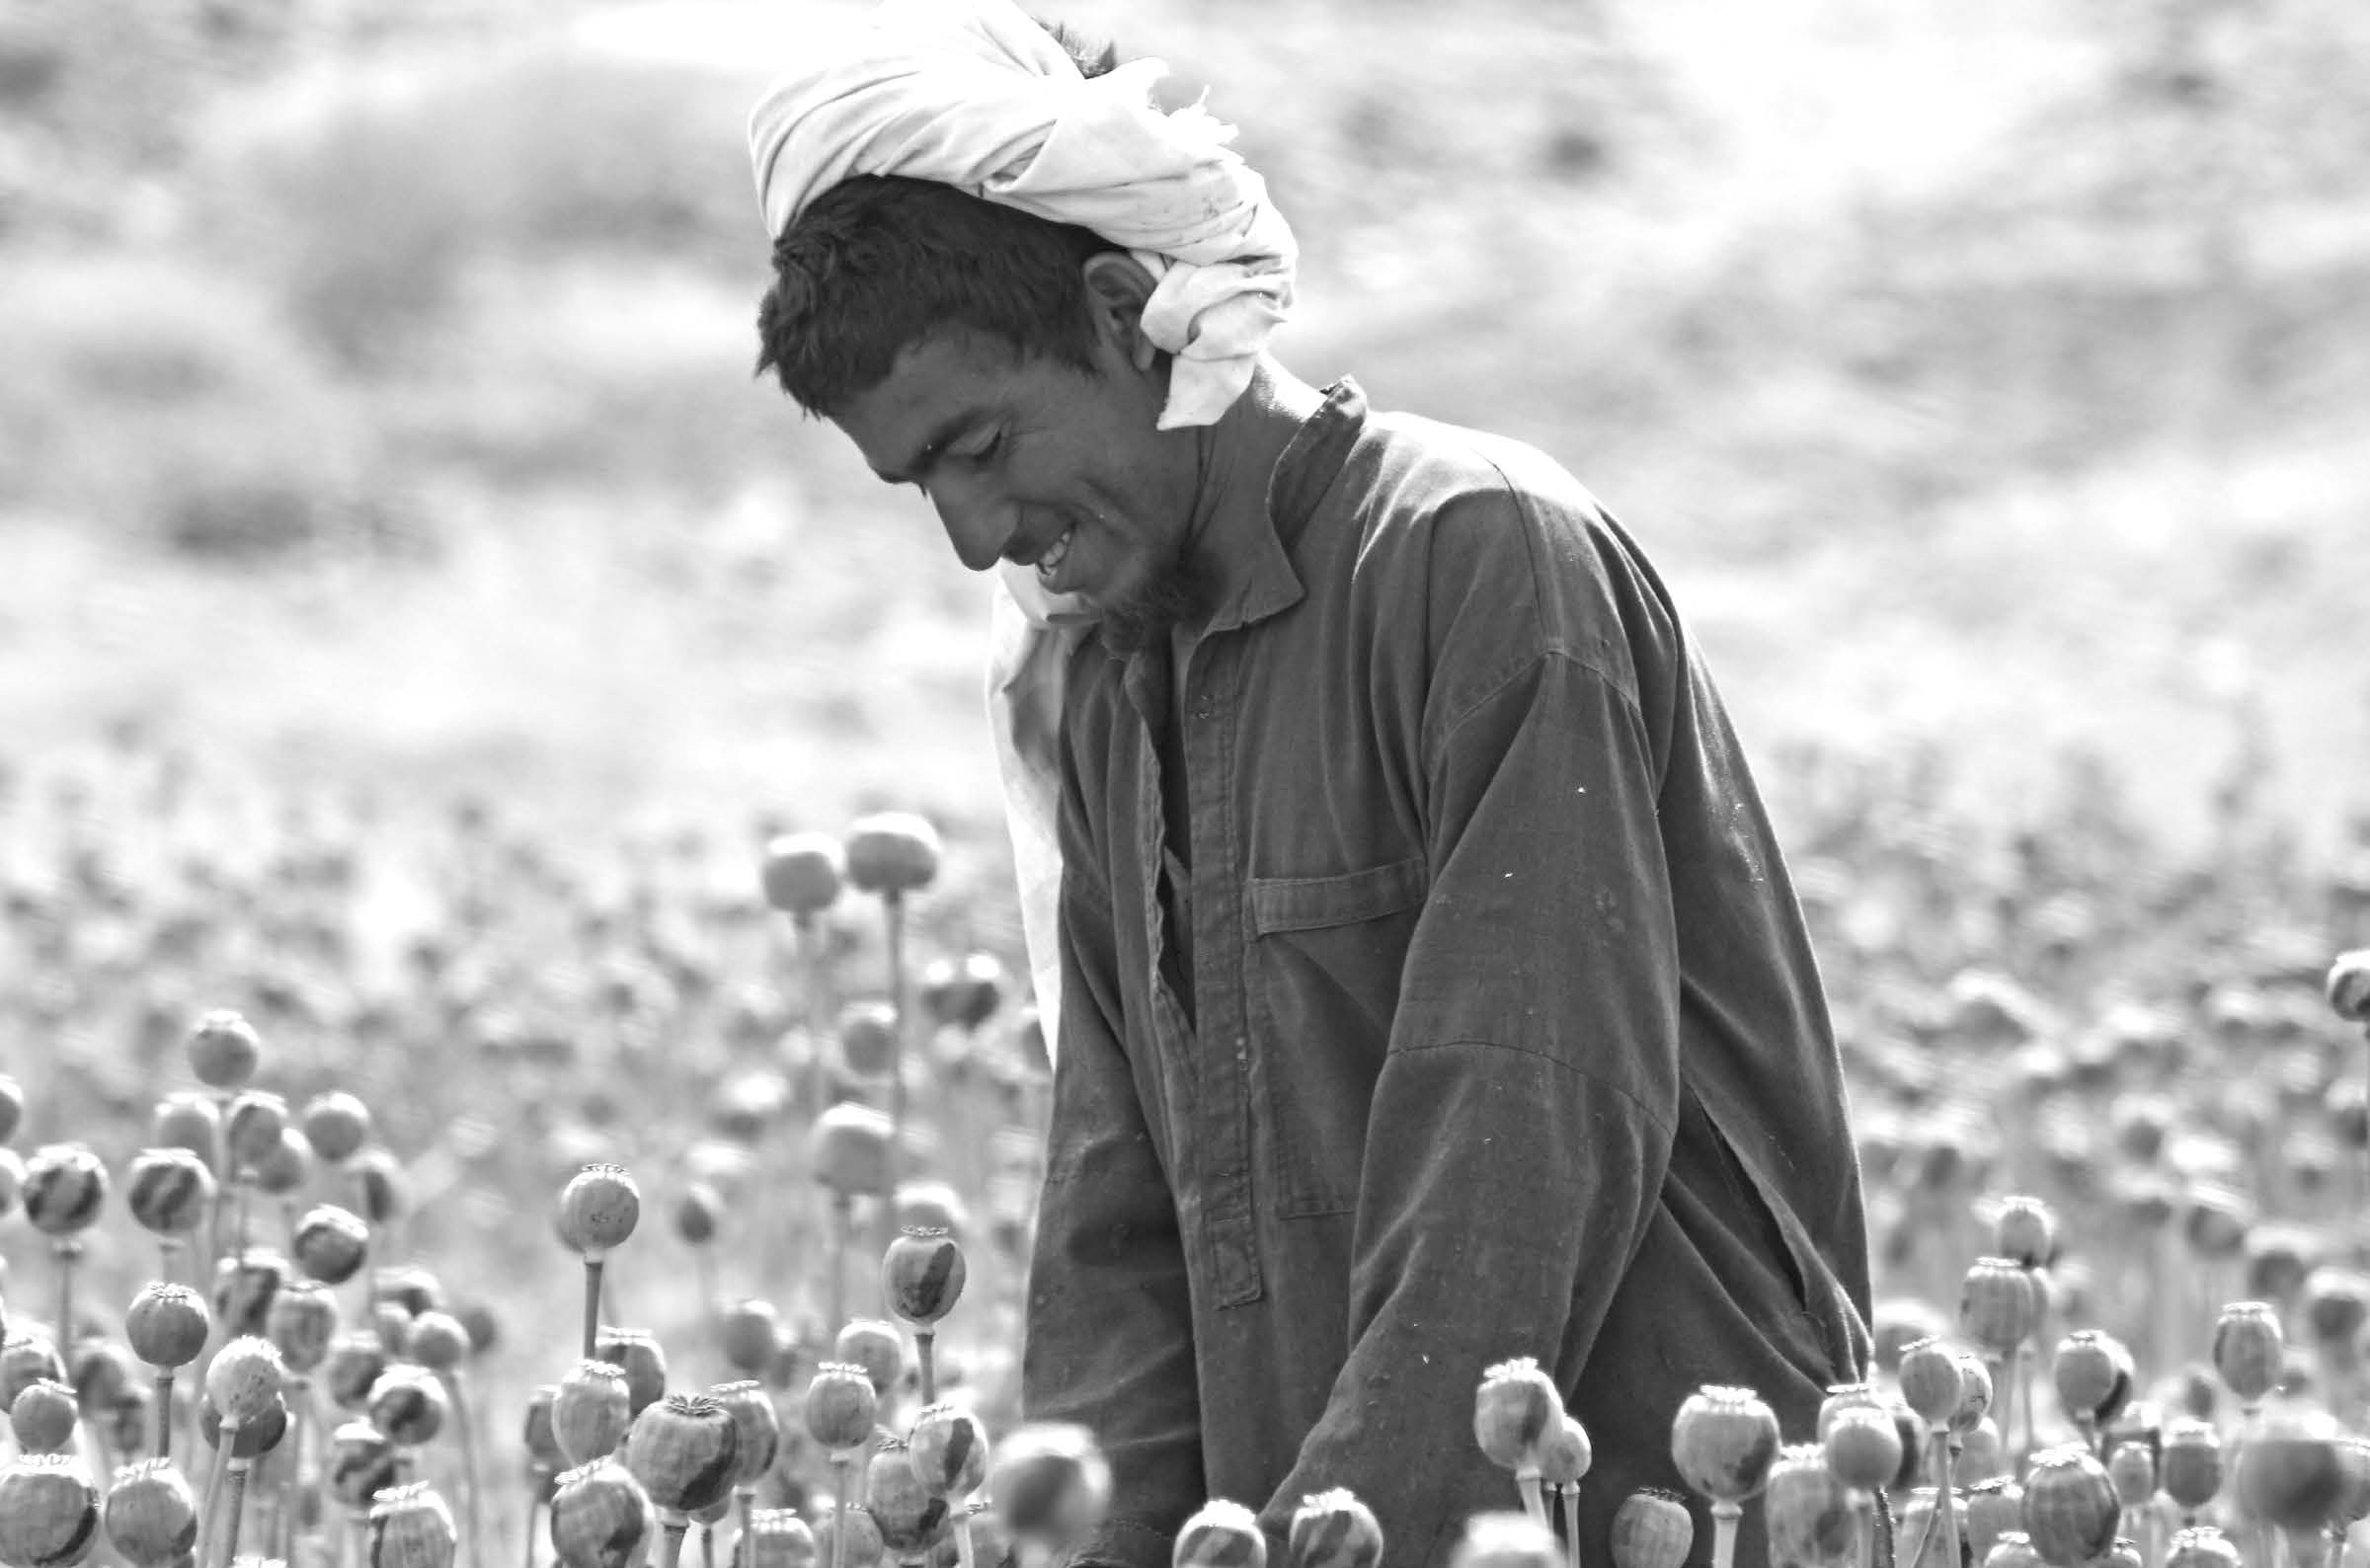 An Afghan farmer in his poppy field. It has been estimated that Afghanistan is the source of up to 90 percent of the world’s opium. All photos on this page courtesy of J. Joseph DuWors.